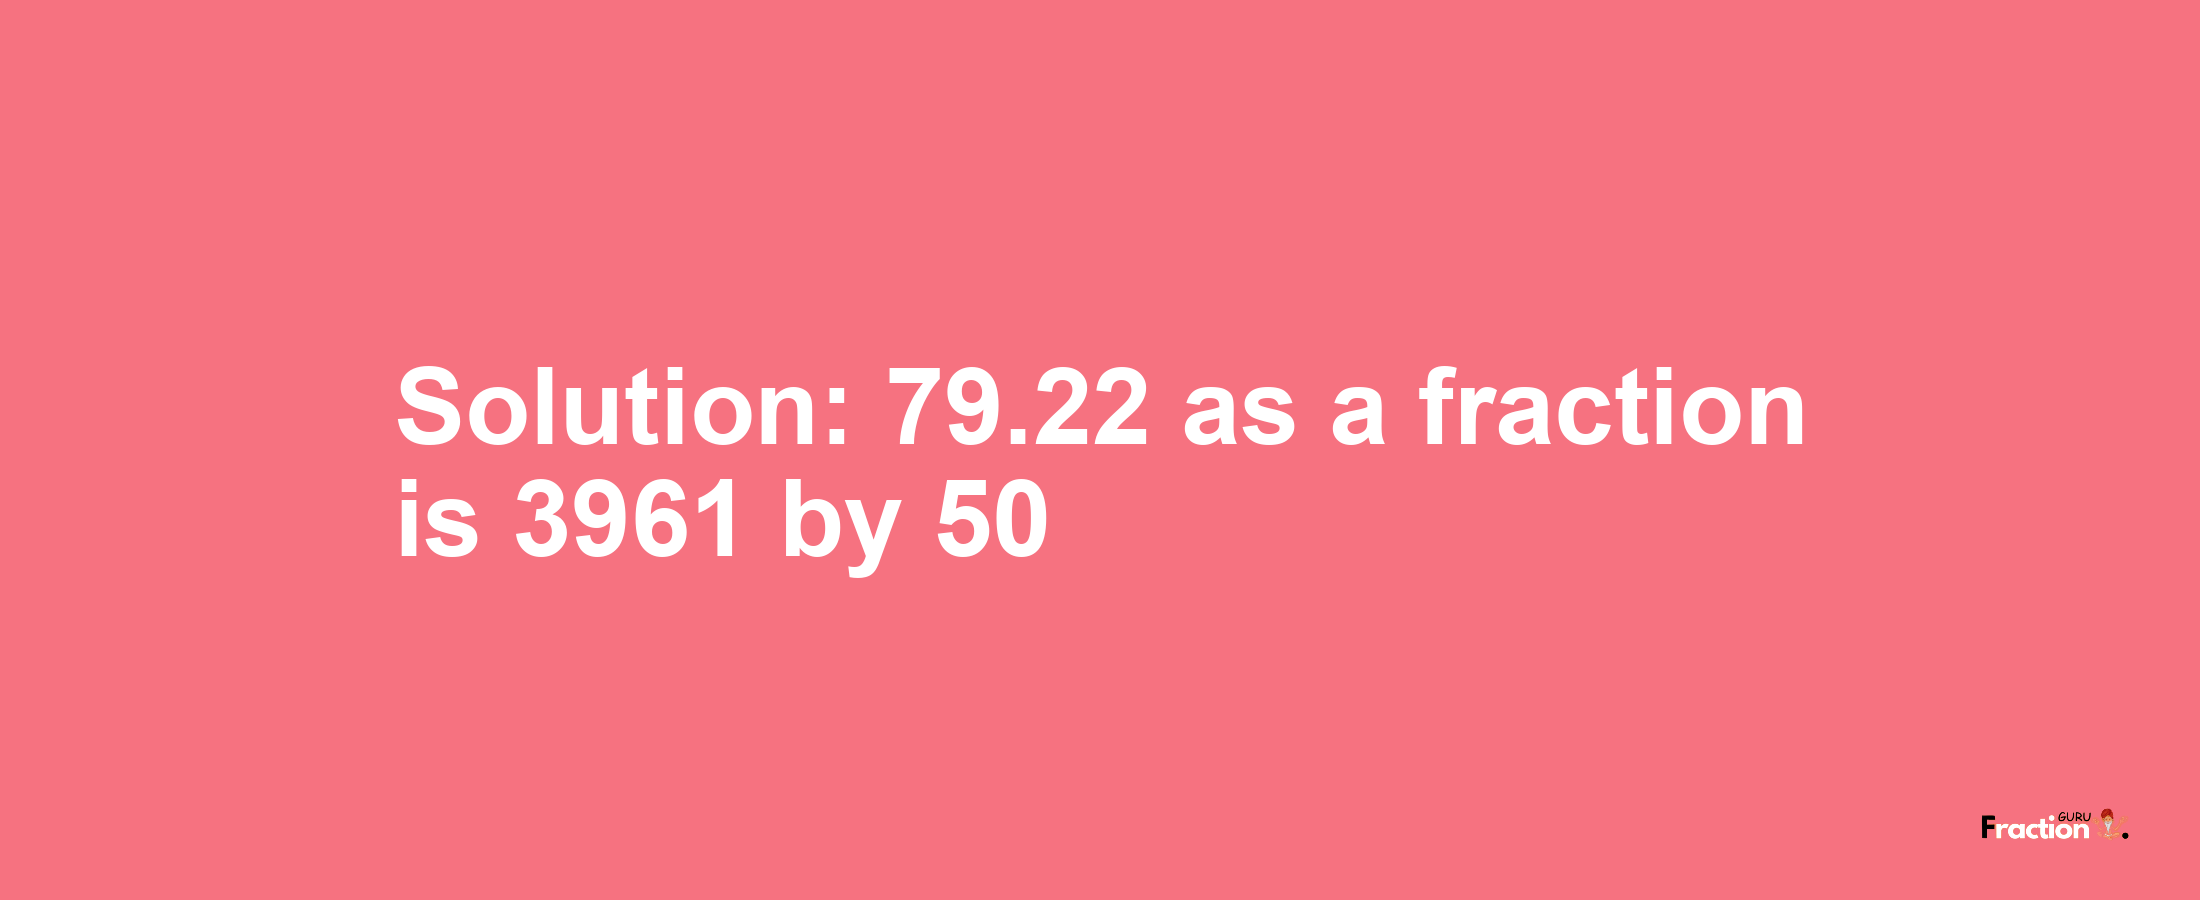 Solution:79.22 as a fraction is 3961/50